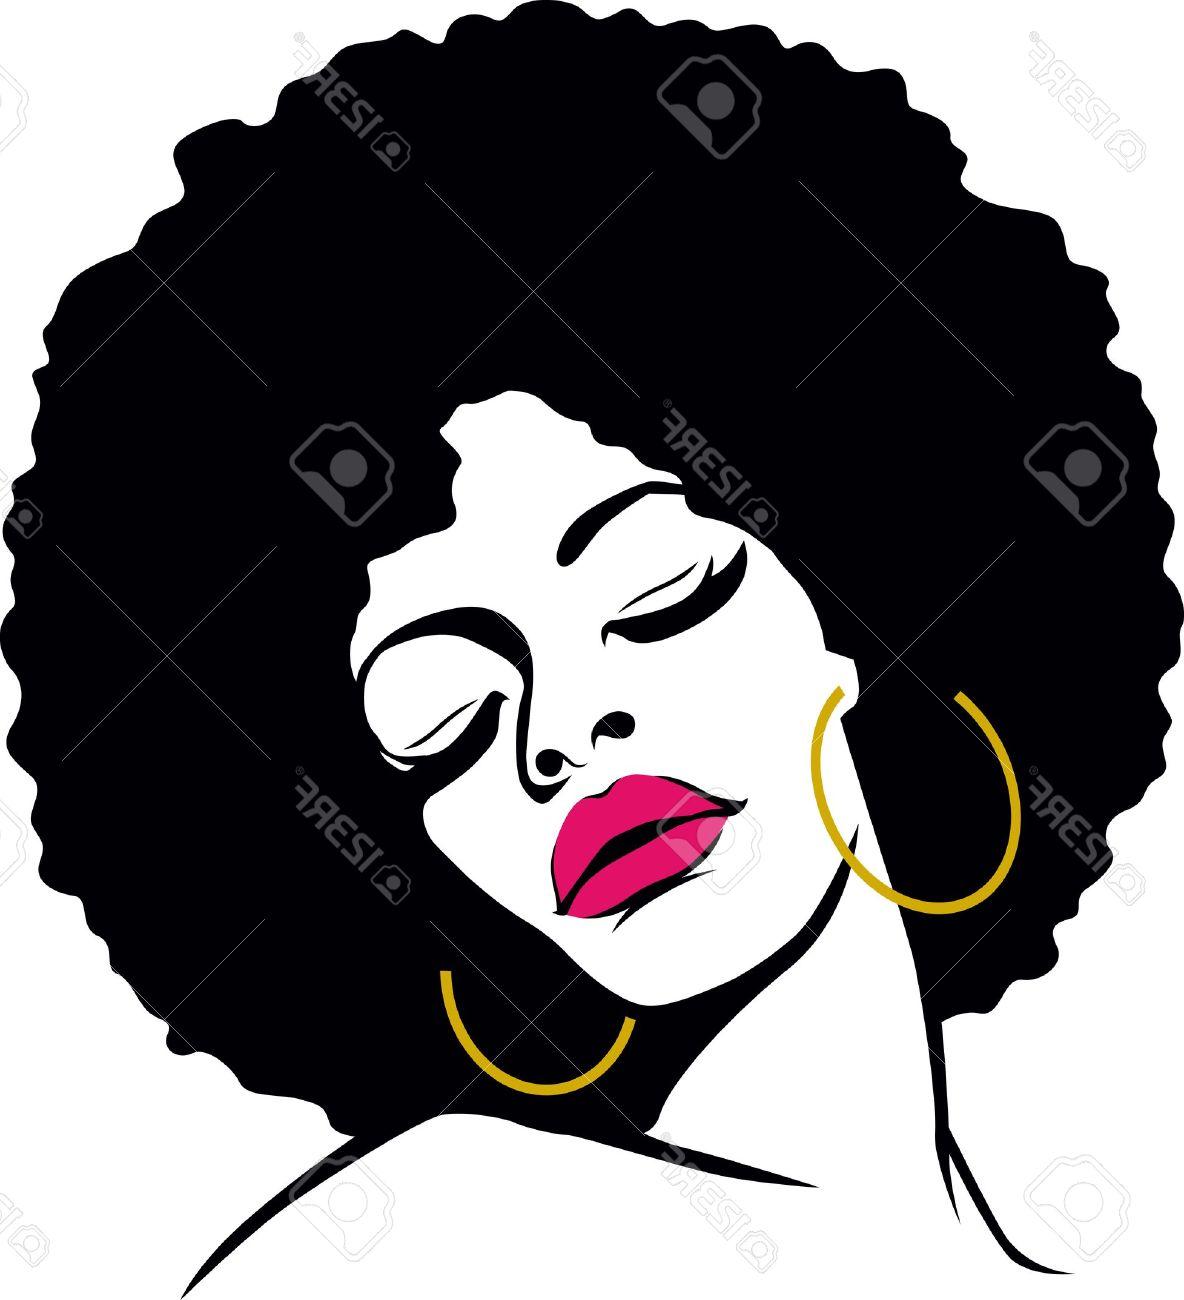 Afro Silhouette Vector at GetDrawings | Free download